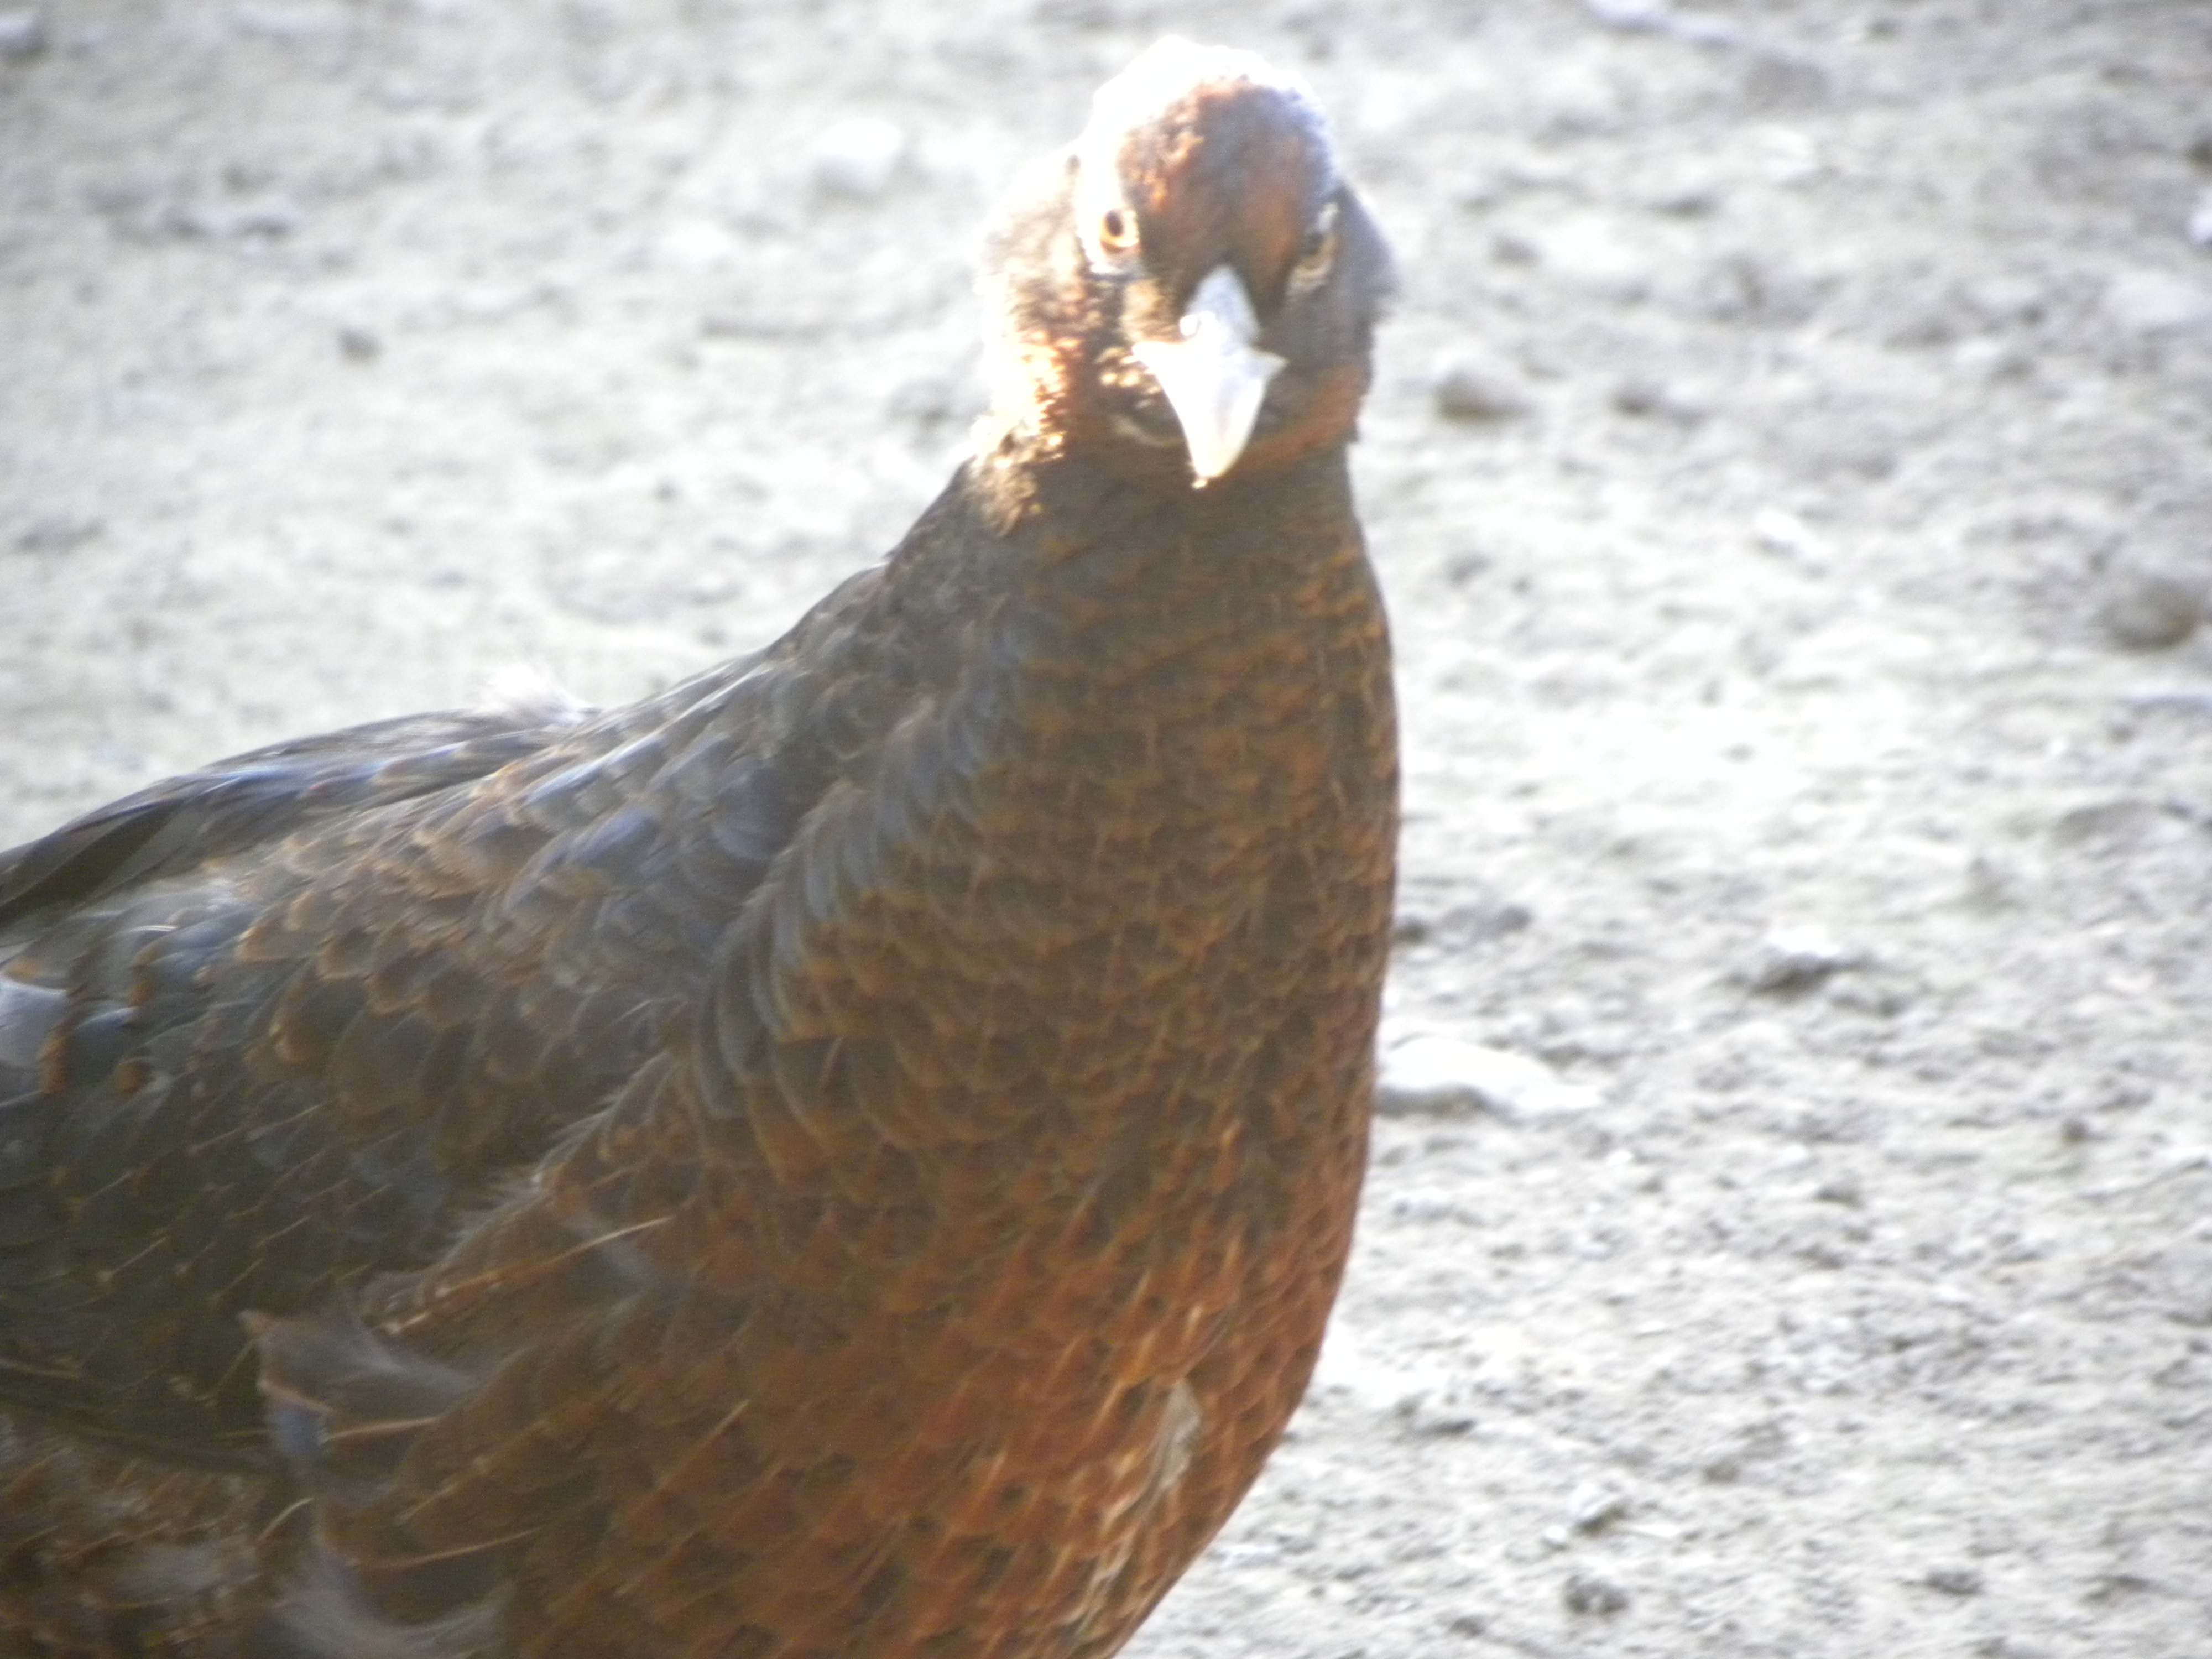 if anyone is wondering, this bird is a hybrid between a Impeyan male and a scintillating copper hen